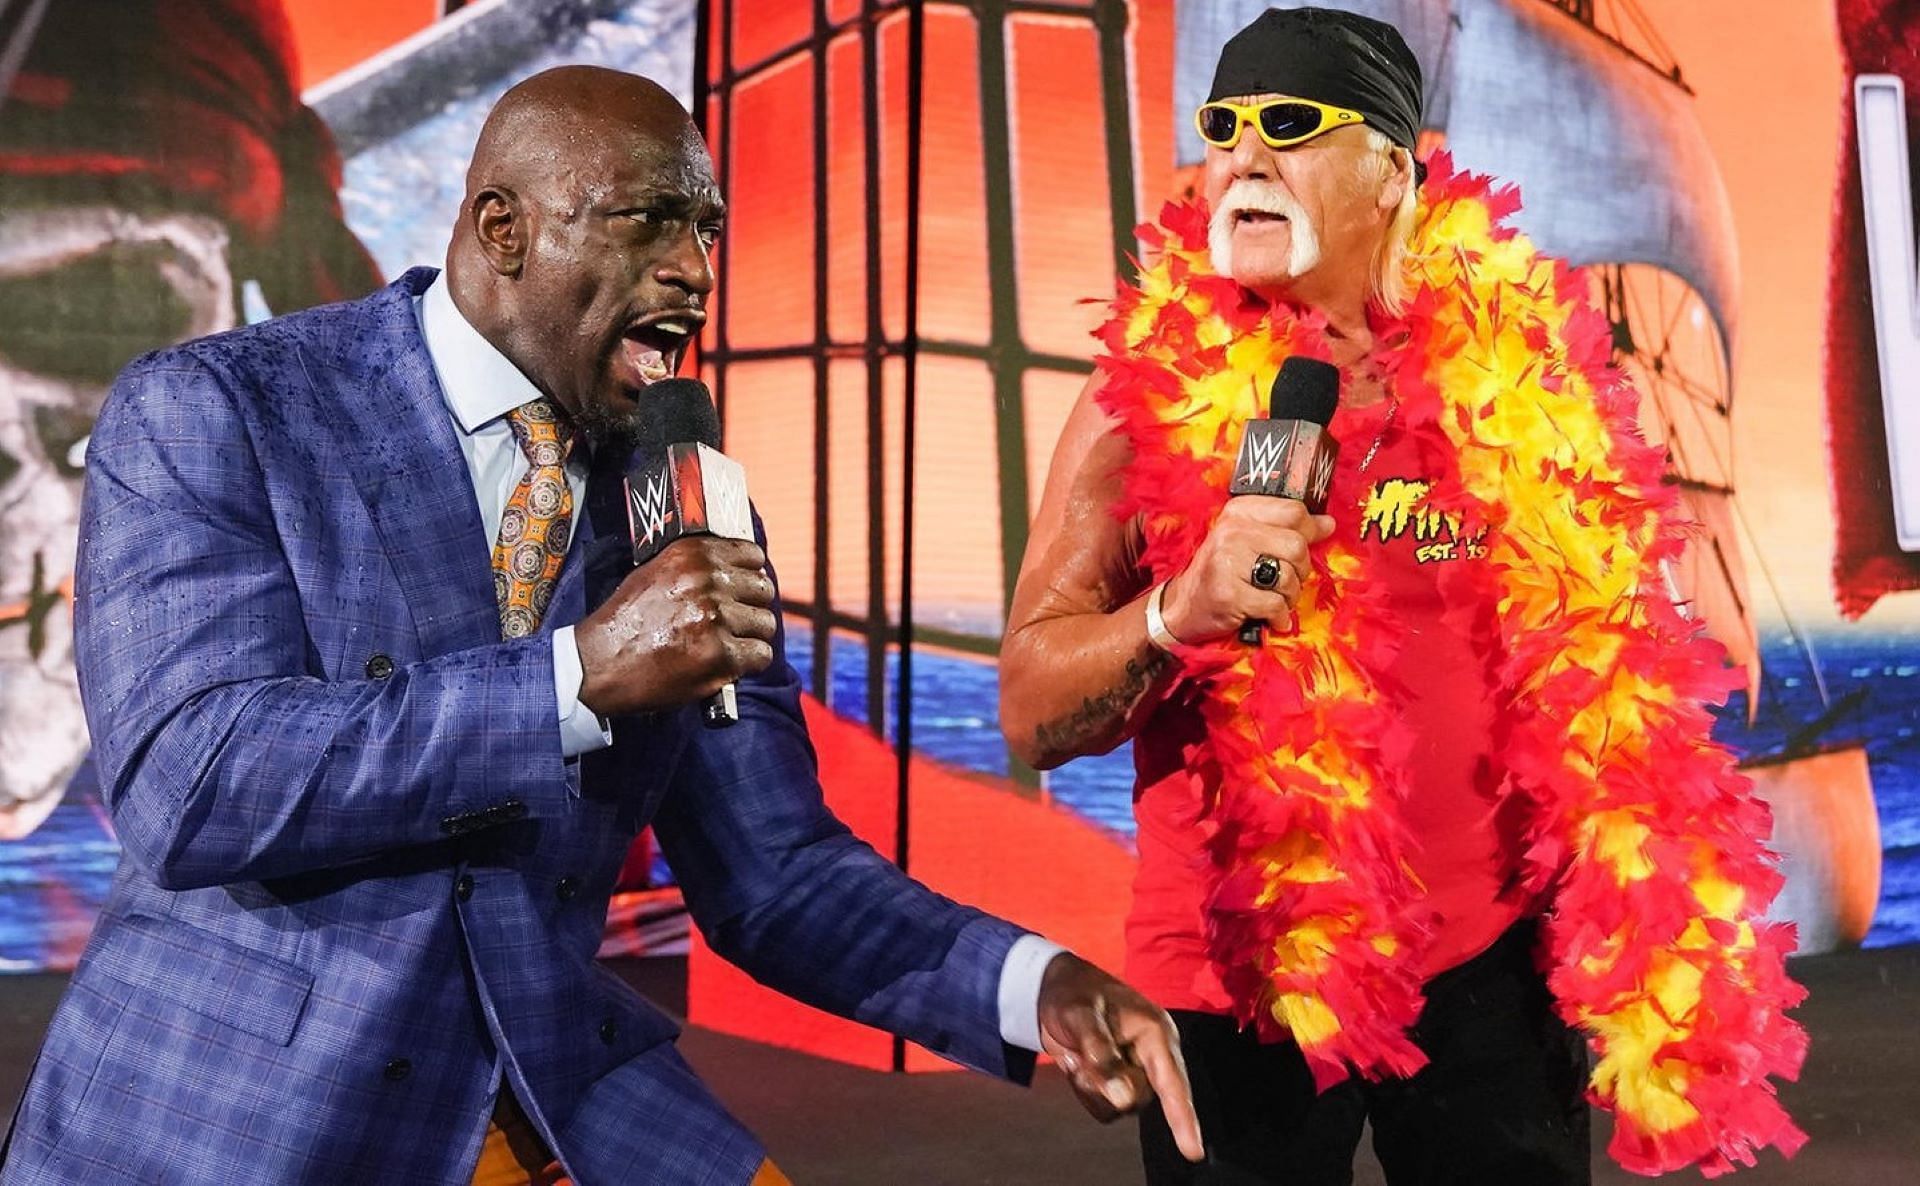 Would Hogan agree to be the special guest host for another WWE event?